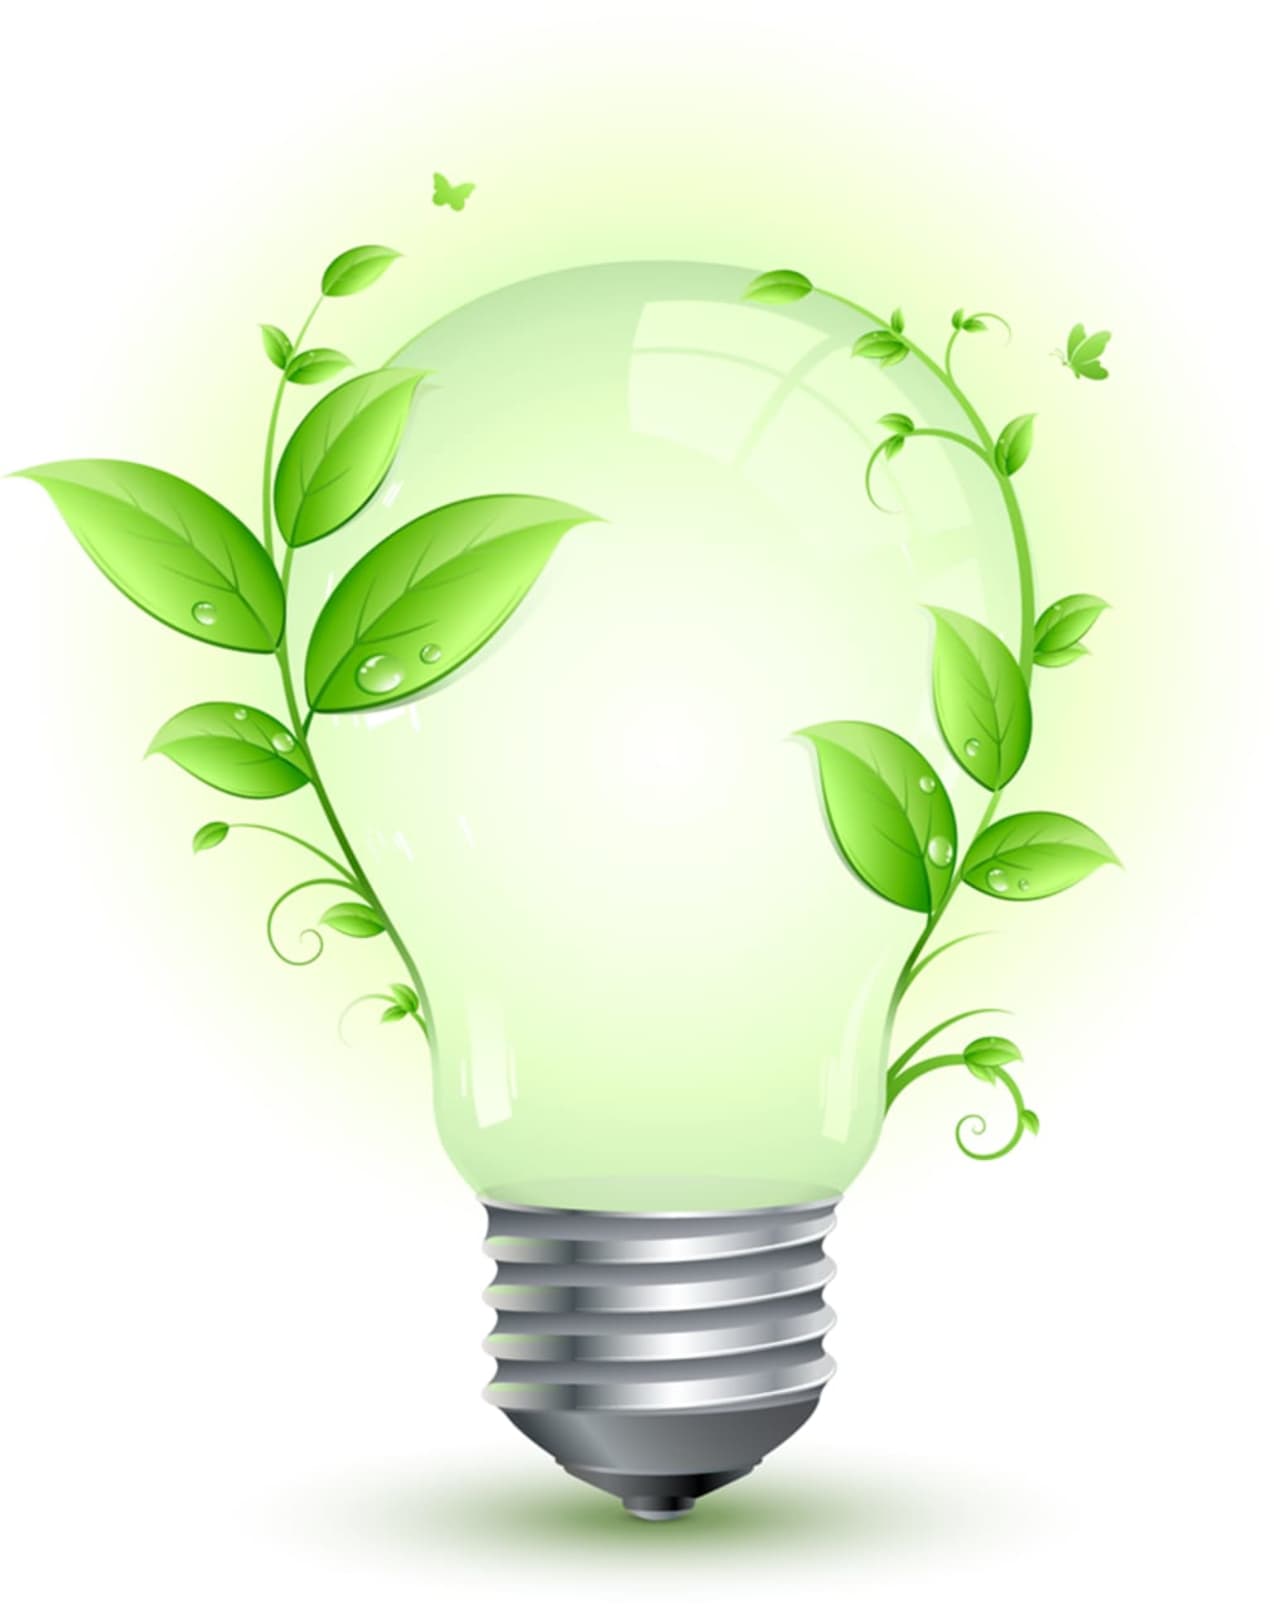 Pleasant Valley Free Library will offer energy conservation tips on Tuesday.